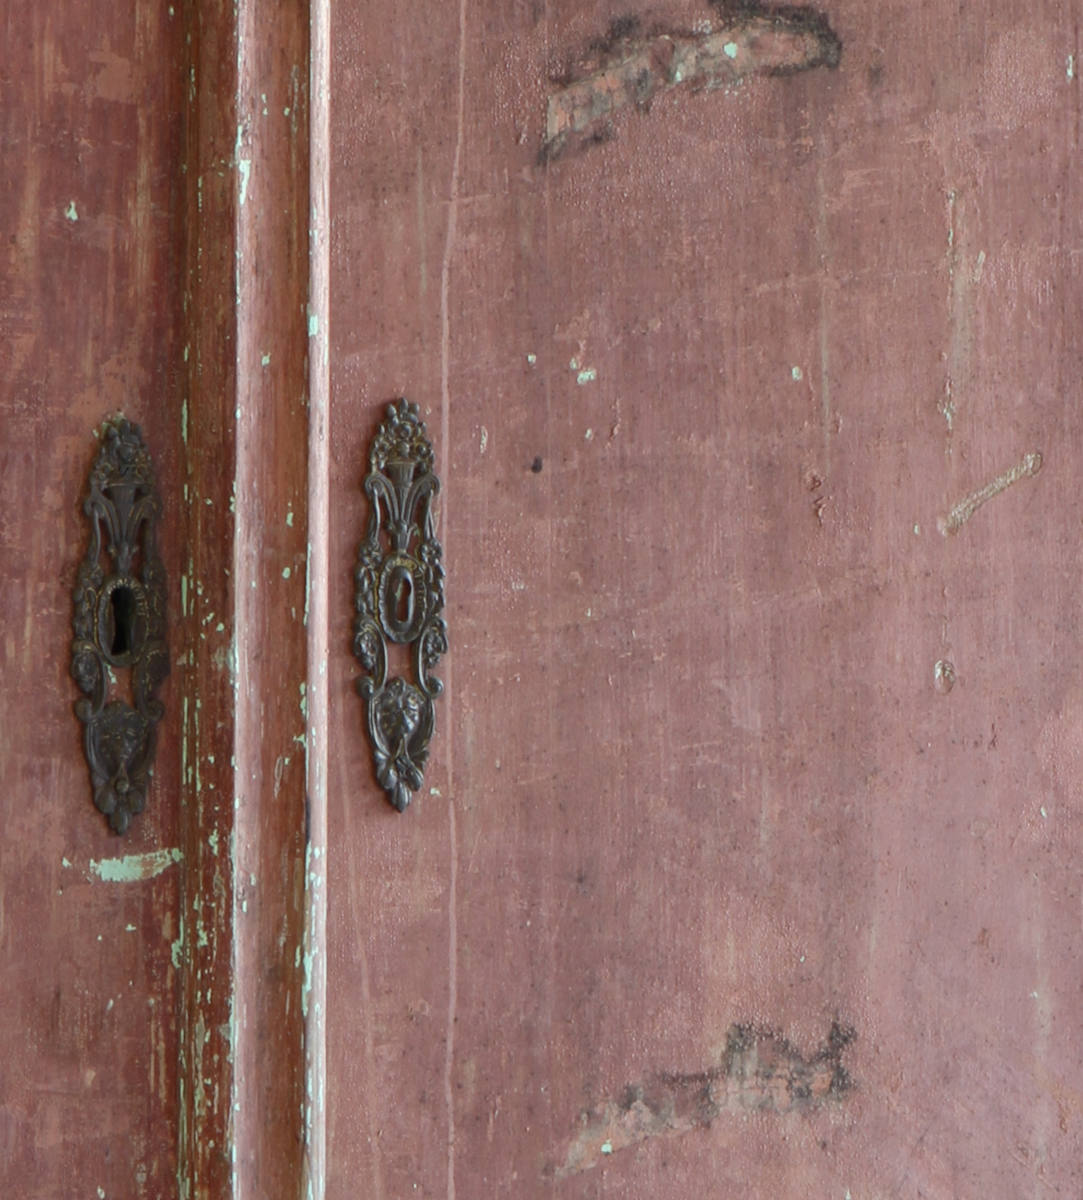 Dutch painted cupboard showing close up detail of the escutcheons